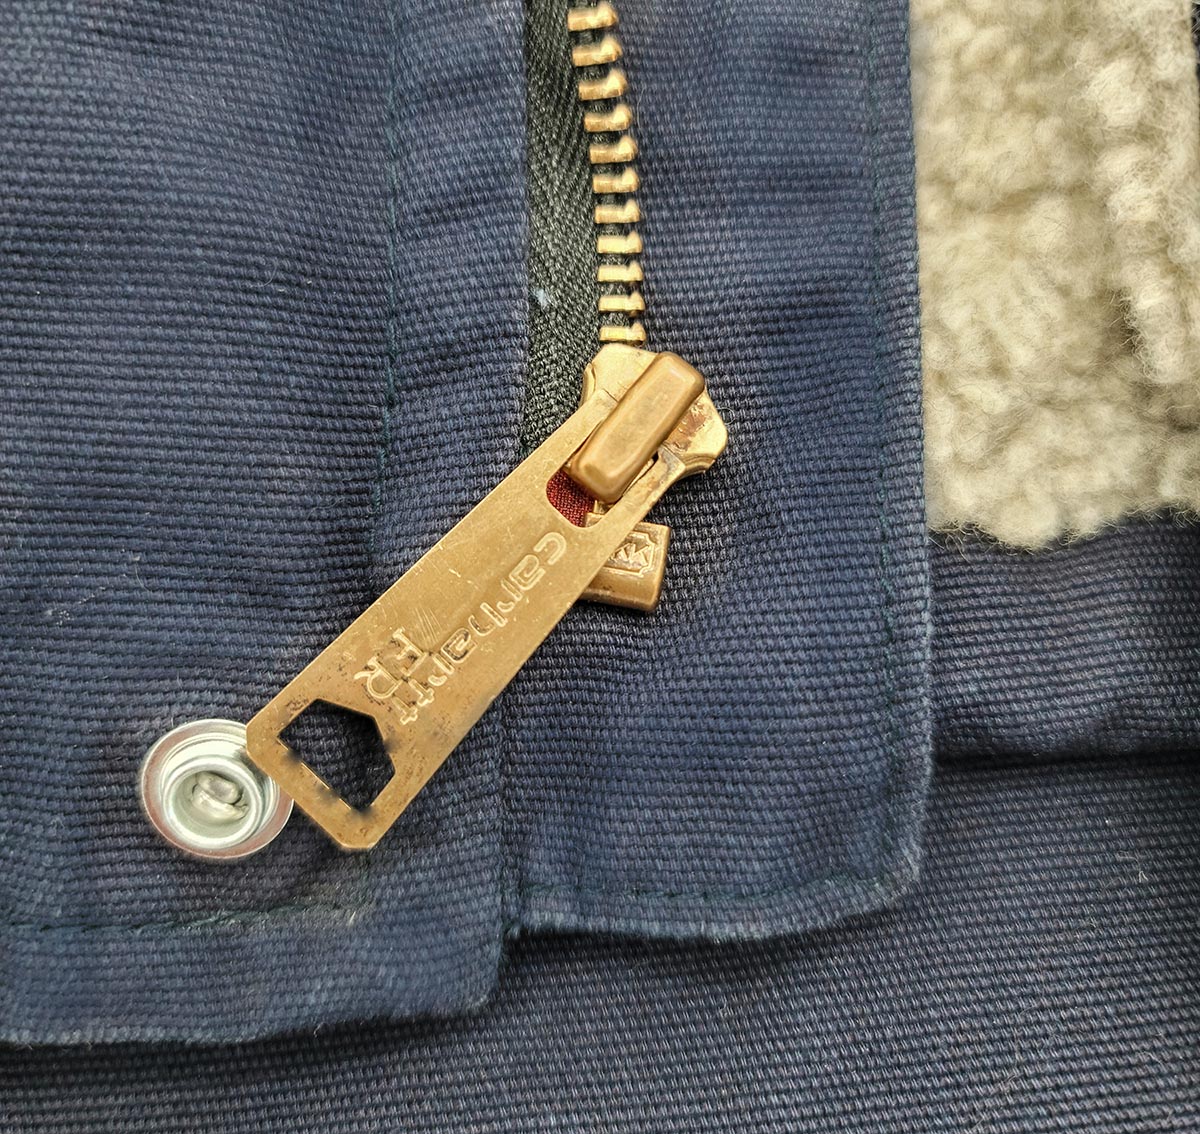 A close-up of the zipper on the Carhartt Flame-Resistant Sherpa-Lined Vest